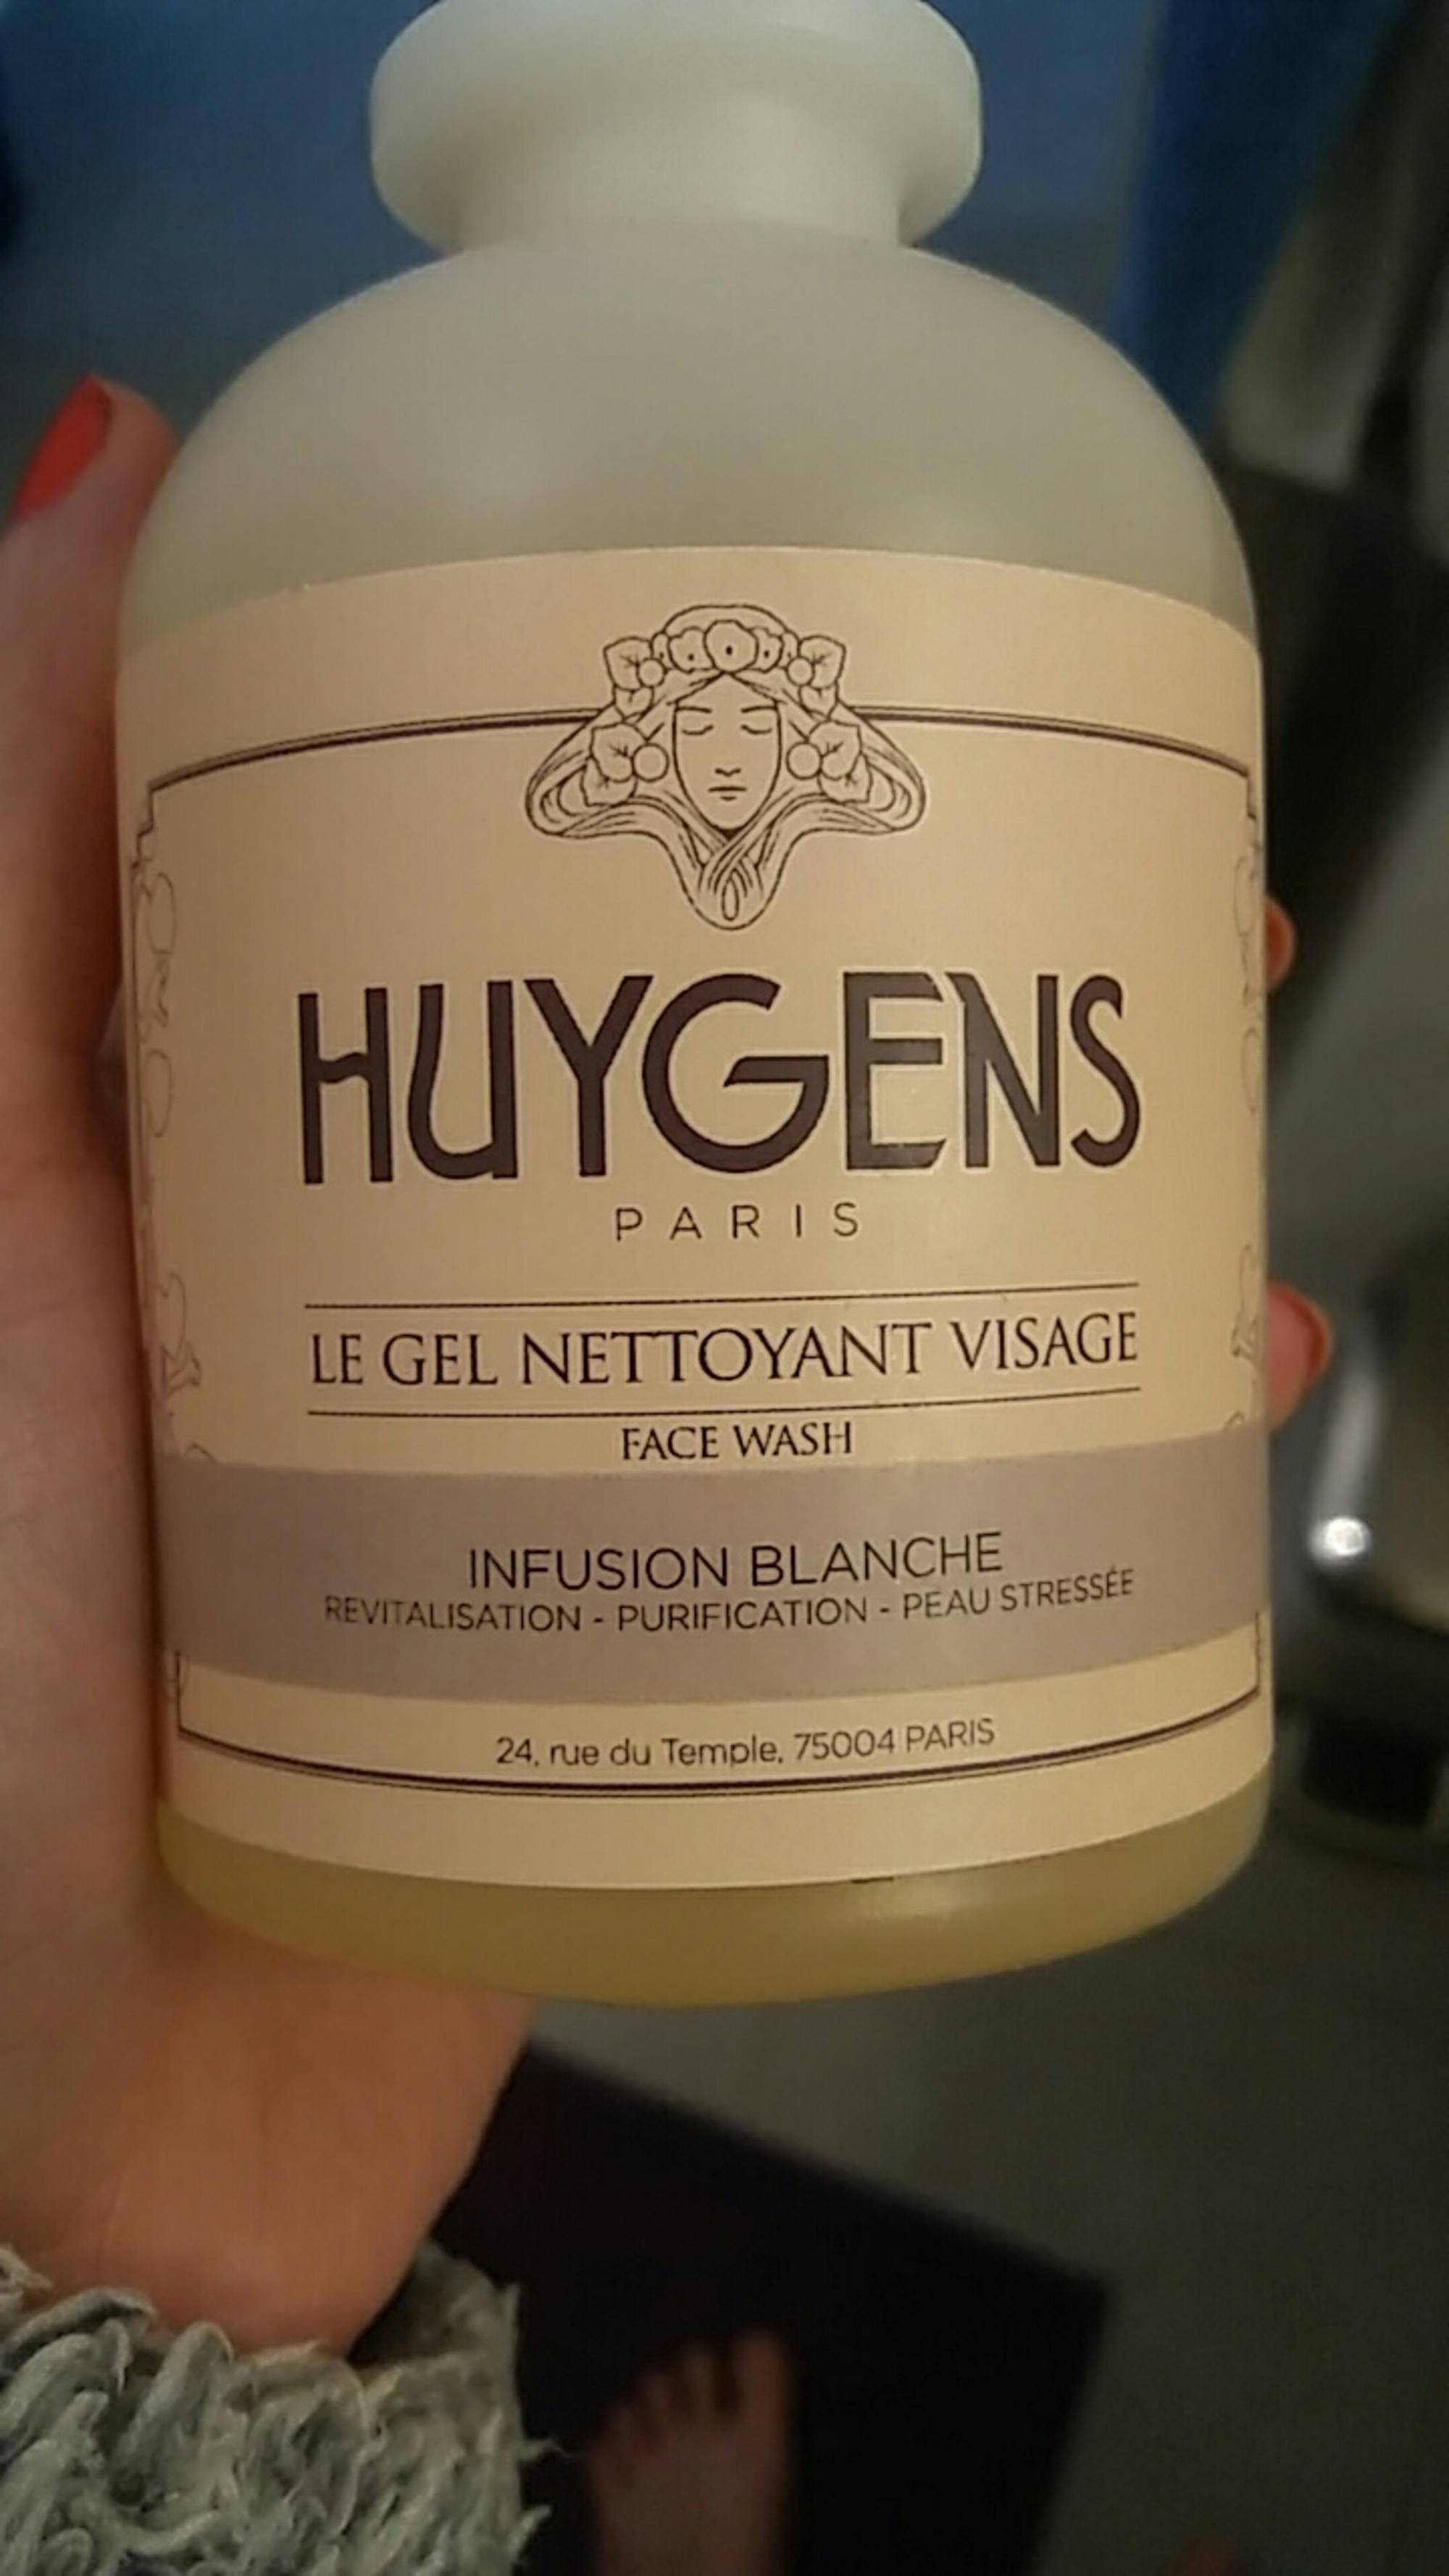 HUYGENS - Le gel nettoyant visage infusion blanche